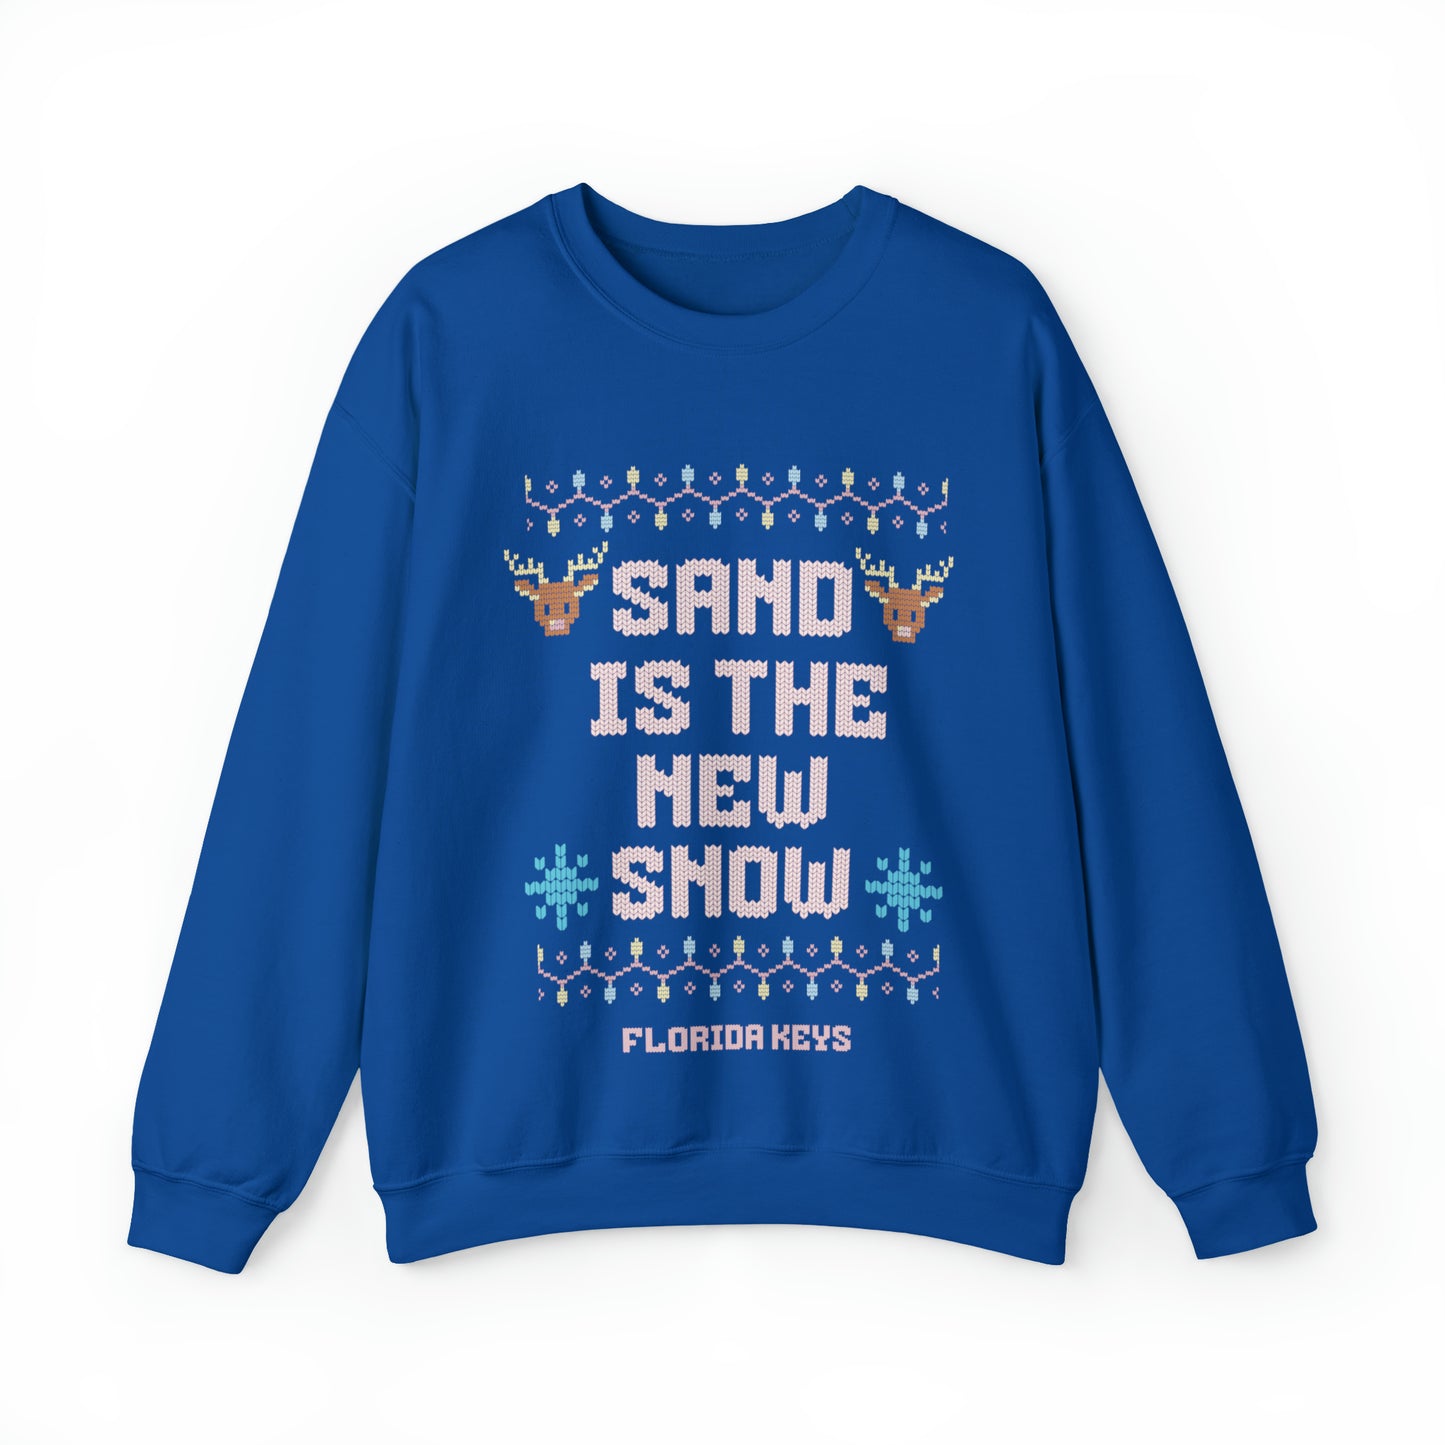 Sand is the new Snow - Sweatshirt for the Florida Keys  - Florida sweatshirt - beach sweatshirt